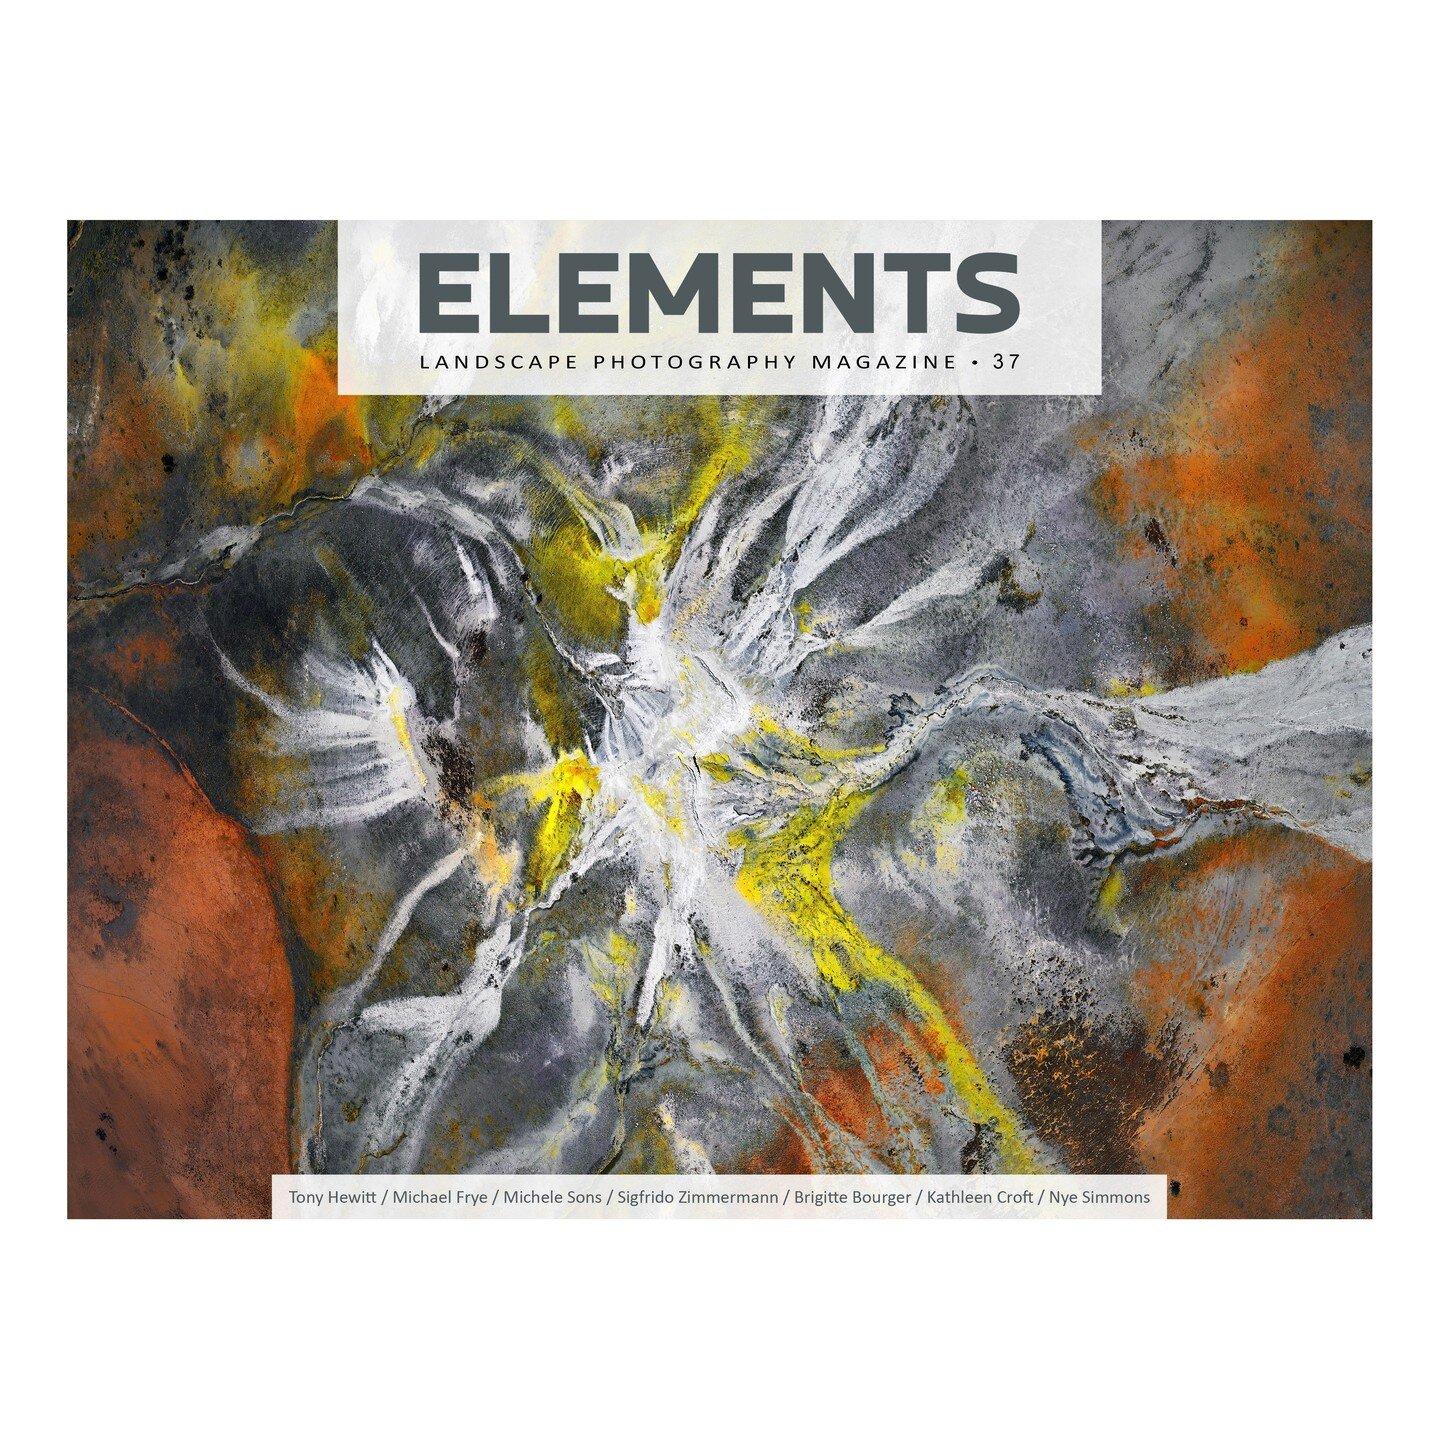 💙So excited to share that my work is again featured in ELEMENTS Magazine, this time in the March 2024 issue. My feature is called Mountain Symphony and tells the story of photographing the spring landscape in Great Smoky Mountains National Park.

Th